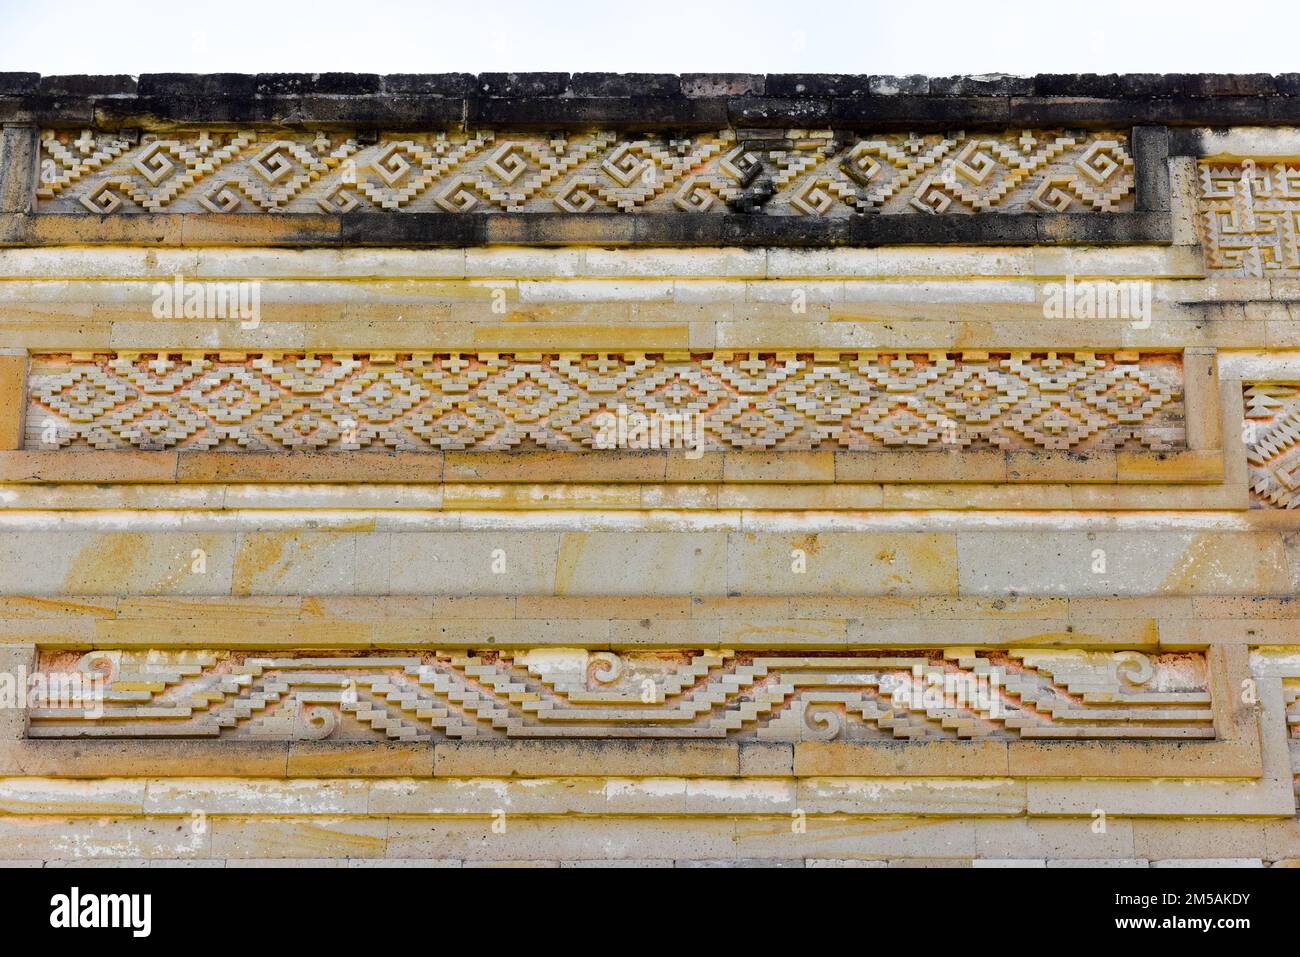 Intricate mosaic fretwork, Archeological Zone of Mitla, Columns Group, The Palace, Oaxaca state, Mexico Stock Photo